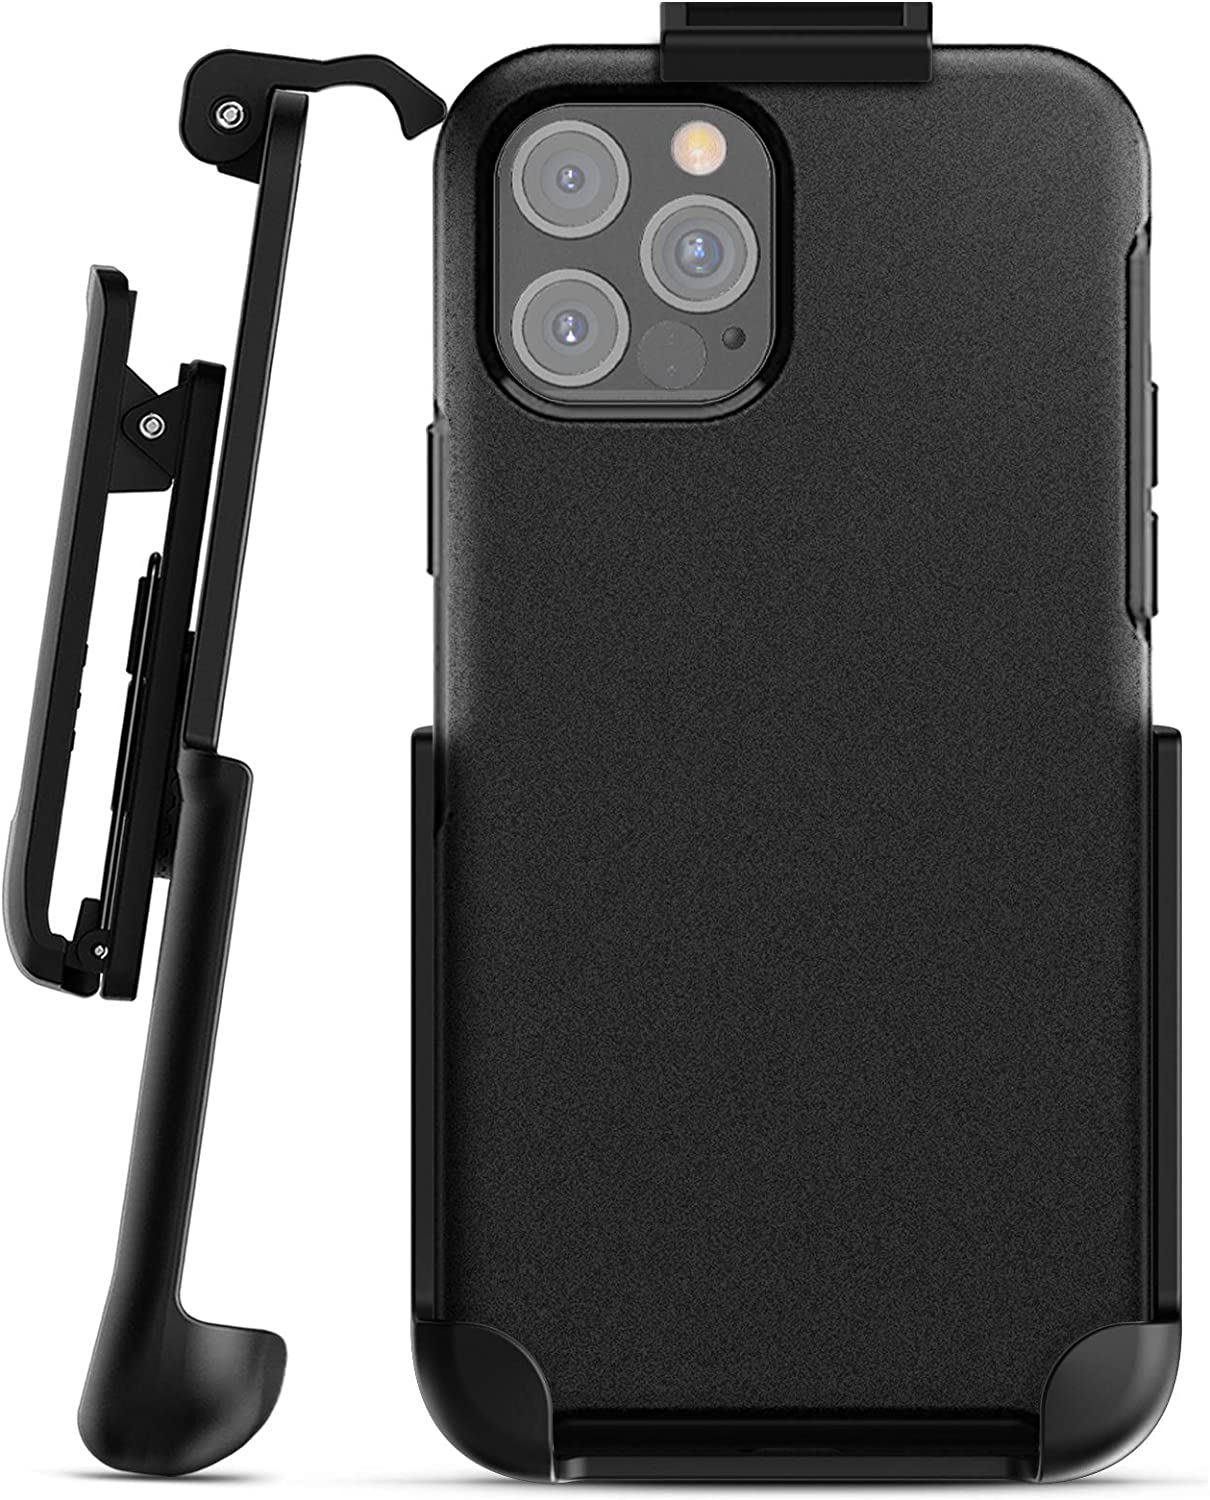 IPHONE 12 PRO MAX HOLSTER CASE